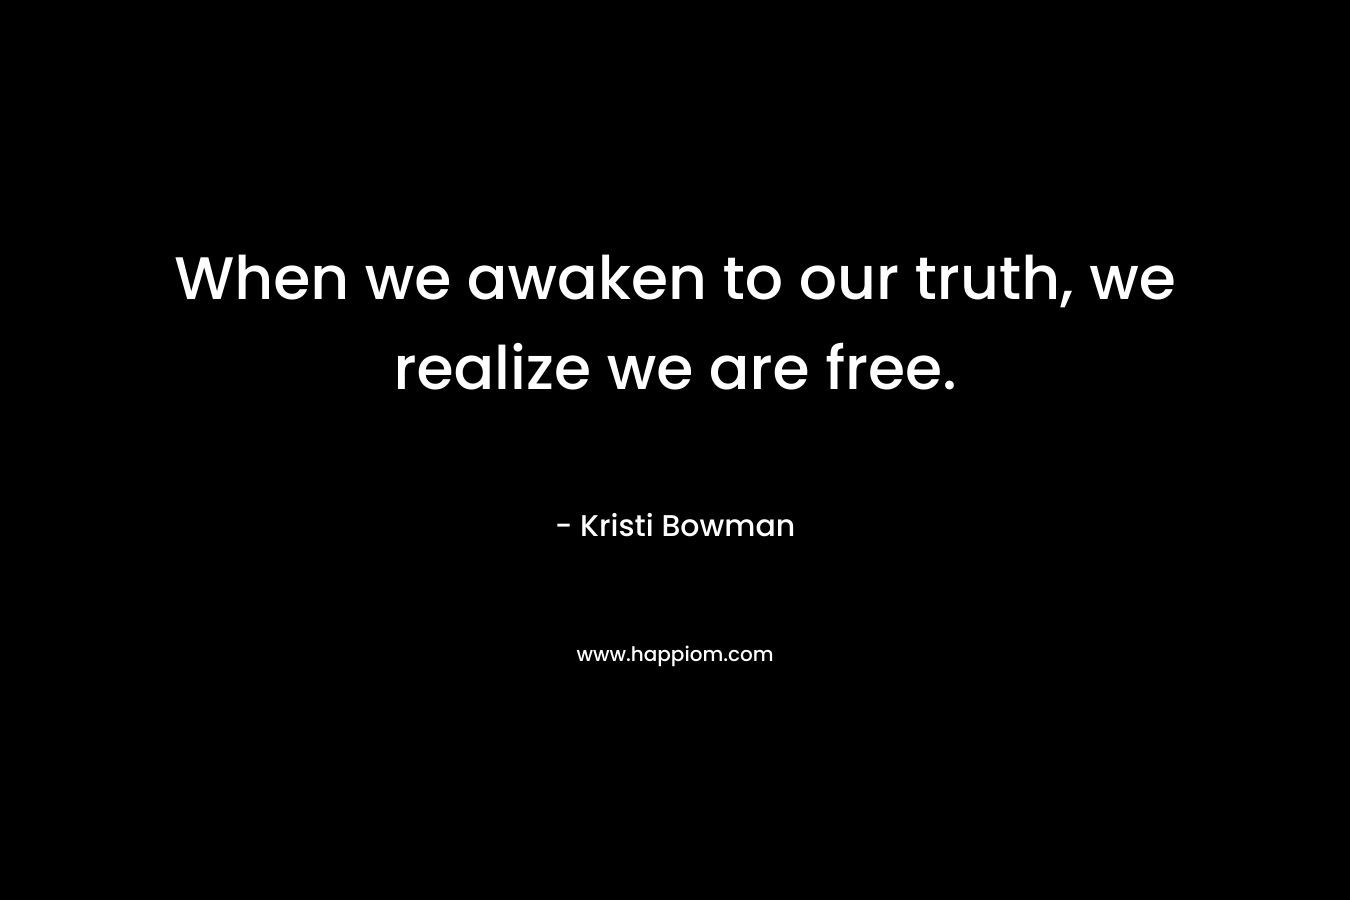 When we awaken to our truth, we realize we are free.